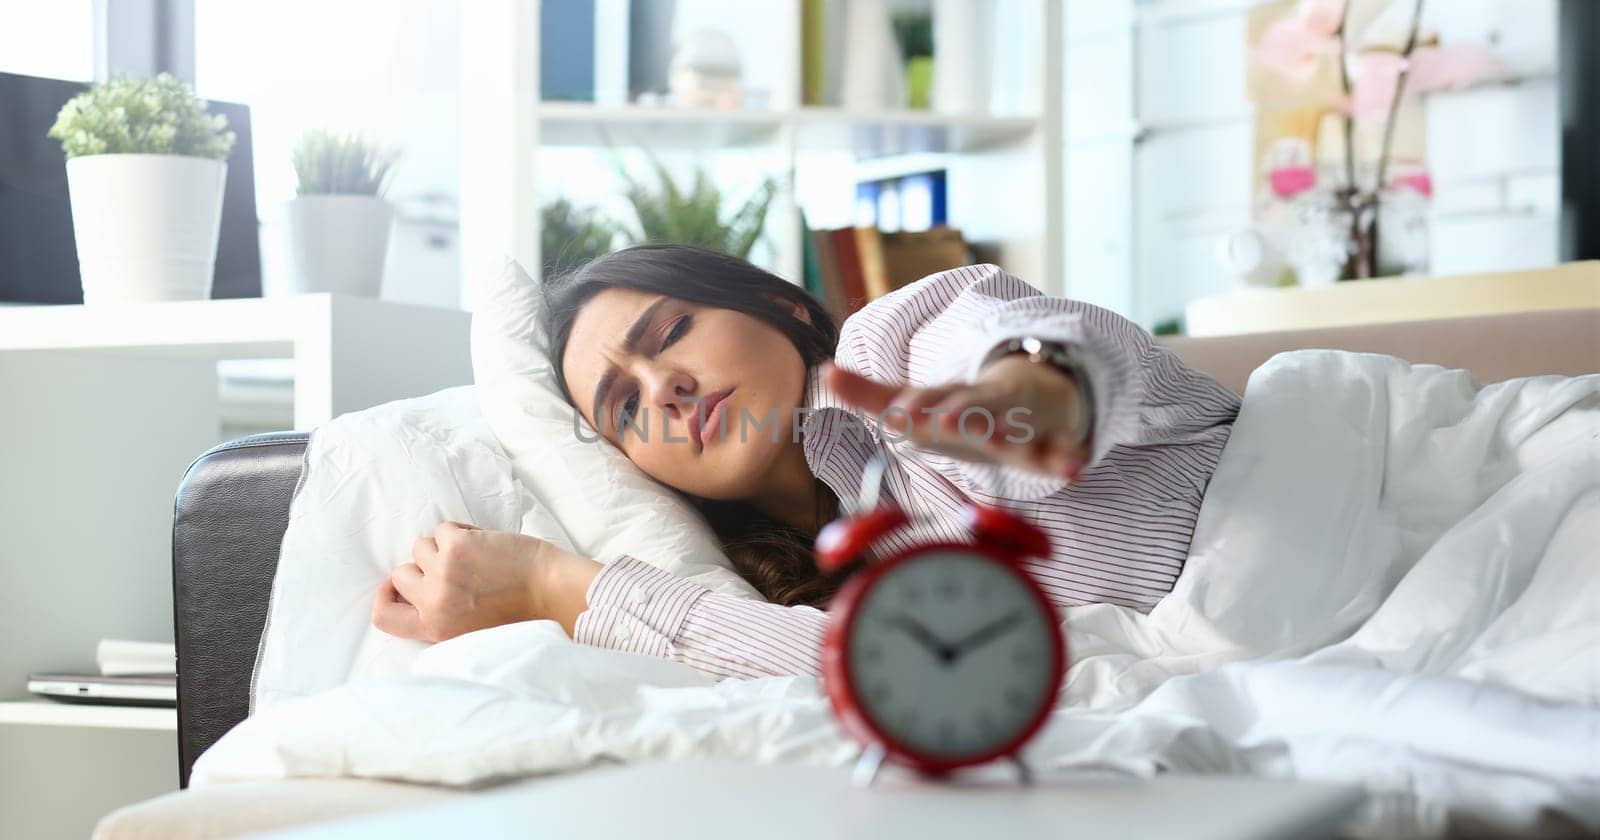 Sleepy young woman portrait with one opened eye trying kill alarm clock. Early wake up not getting enough sleep going work concept. Female stretching hand to ringing alarm willing turn it off